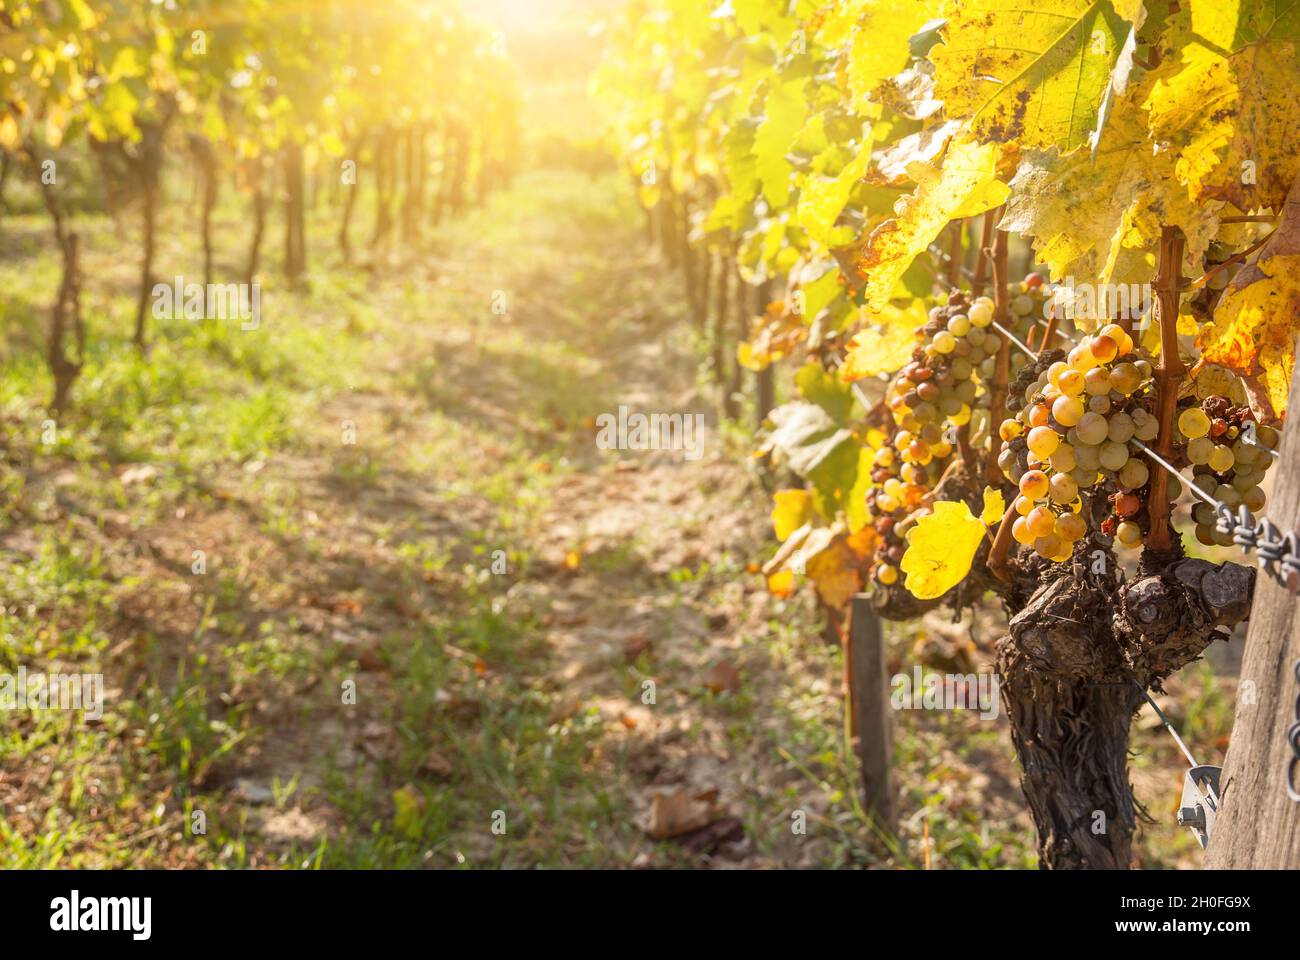 Noble rot of a wine grape, botrytised grapes in sunshine Stock Photo